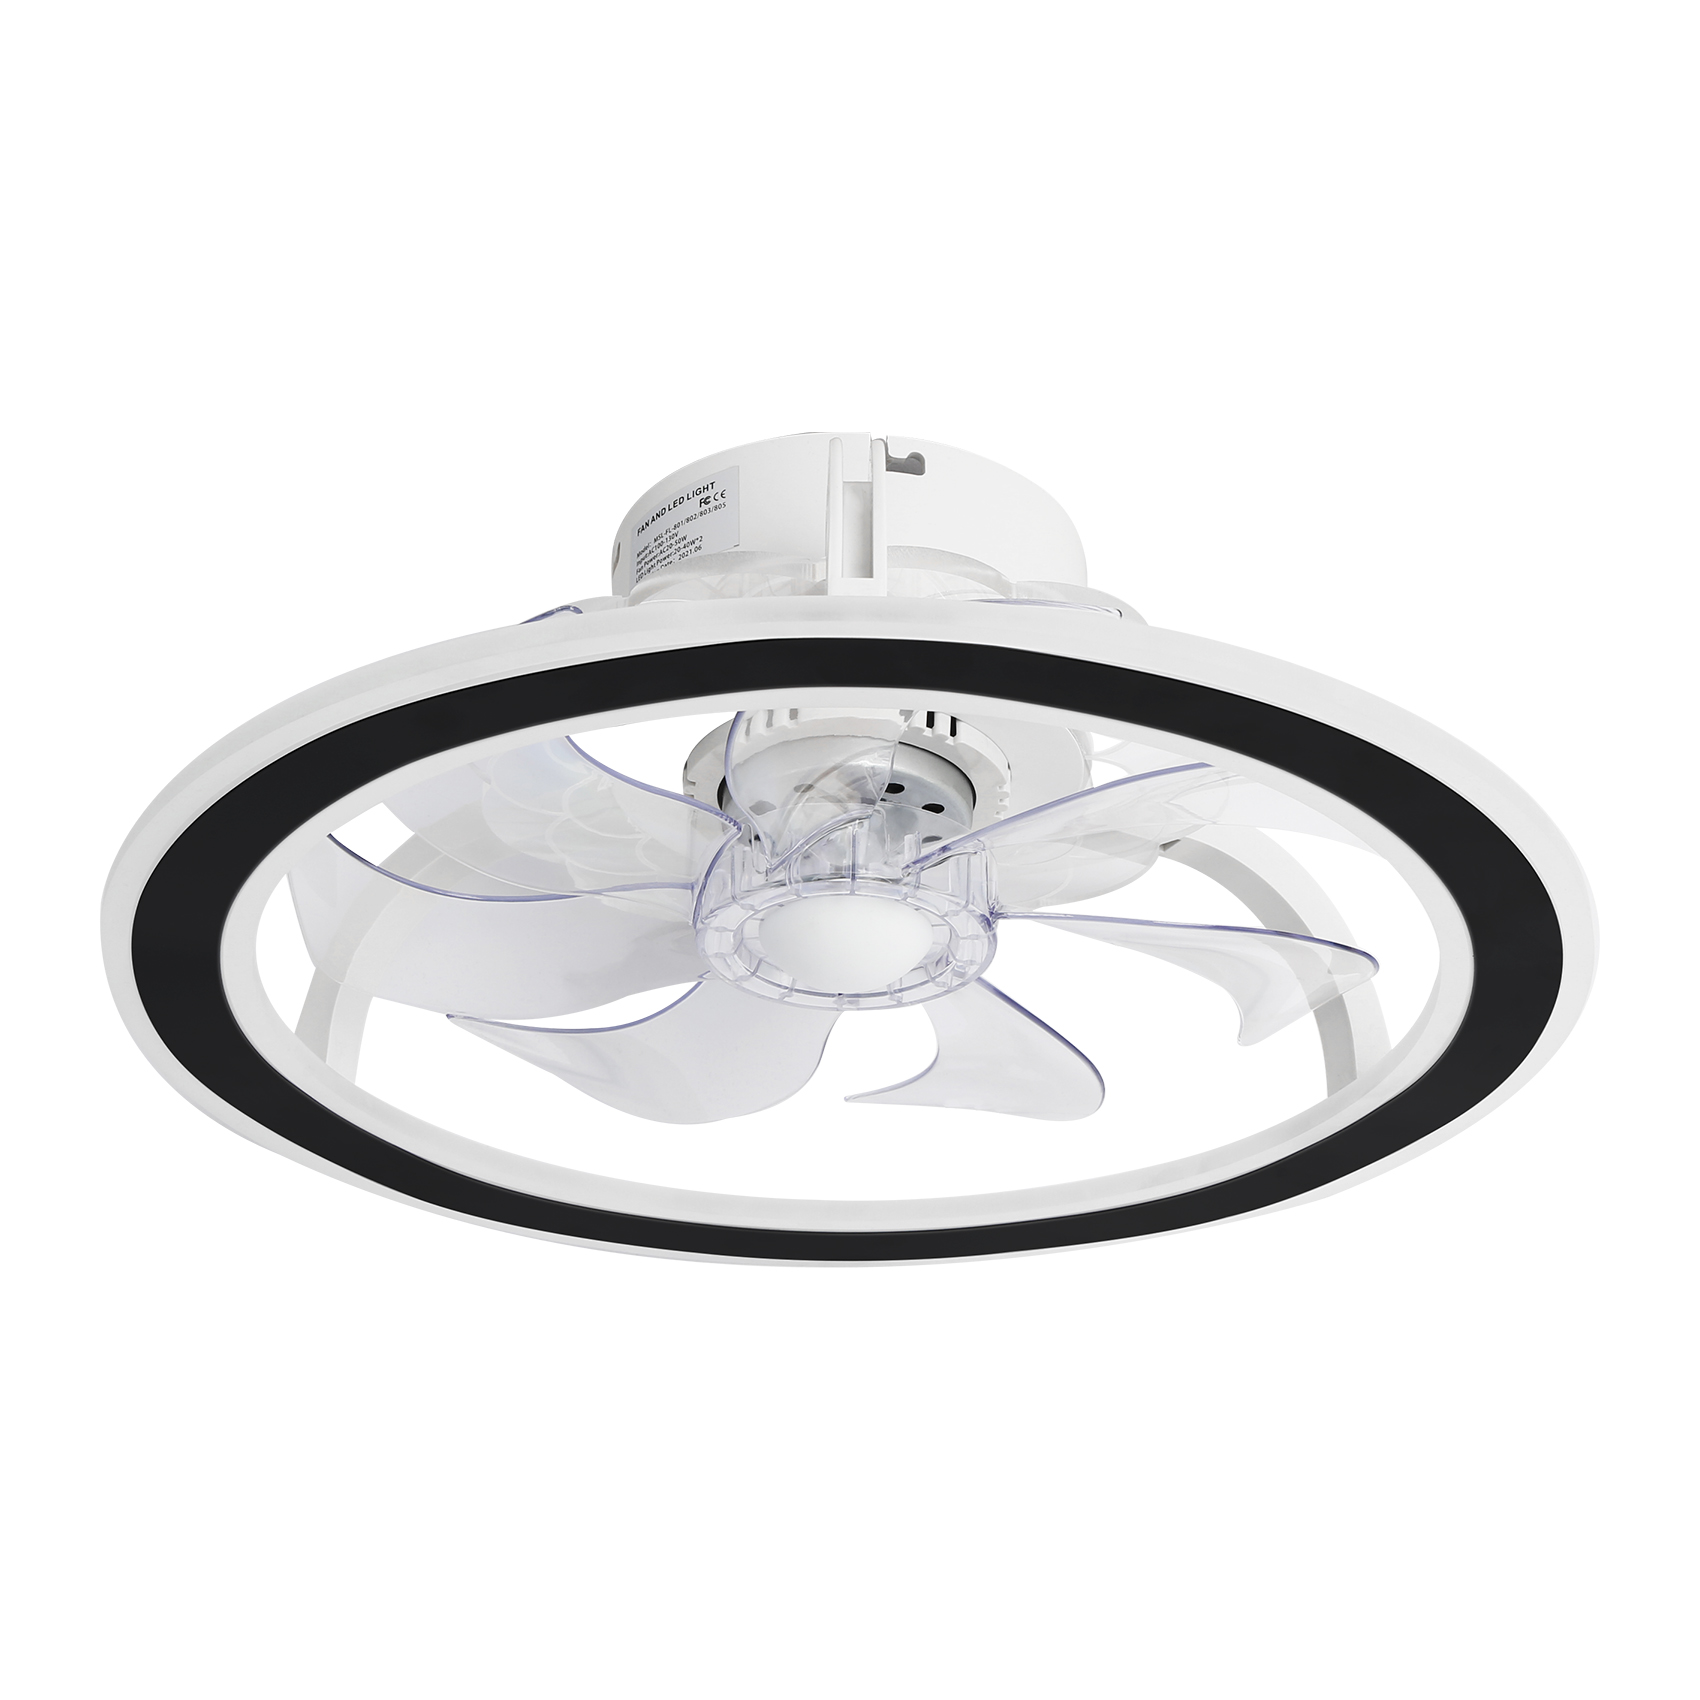 TCFUNDY 18 Ceiling Fan with Light, LED Low Profile Ceiling Fan Lights  Remote Control Dimmable 3 Lig…See more TCFUNDY 18 Ceiling Fan with Light,  LED